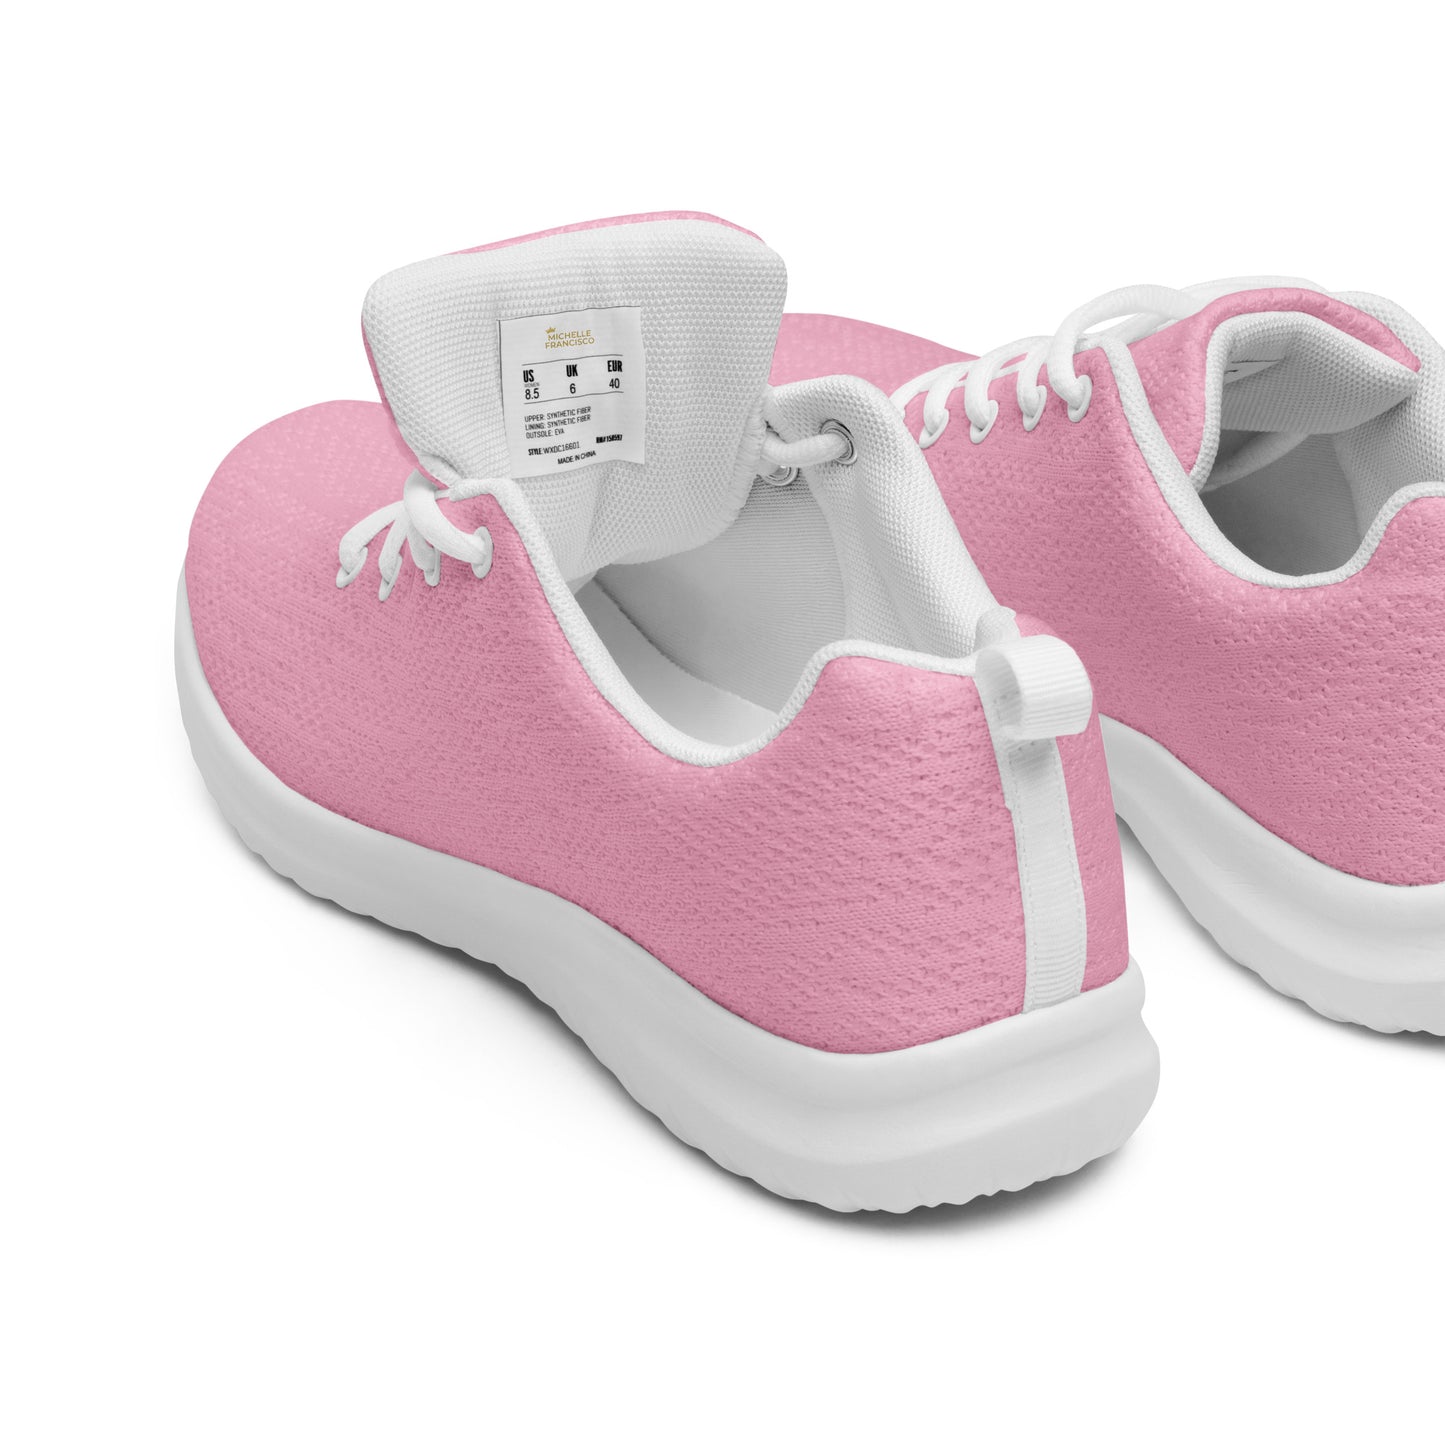 Women’s Cotton Candy Athletic Shoes